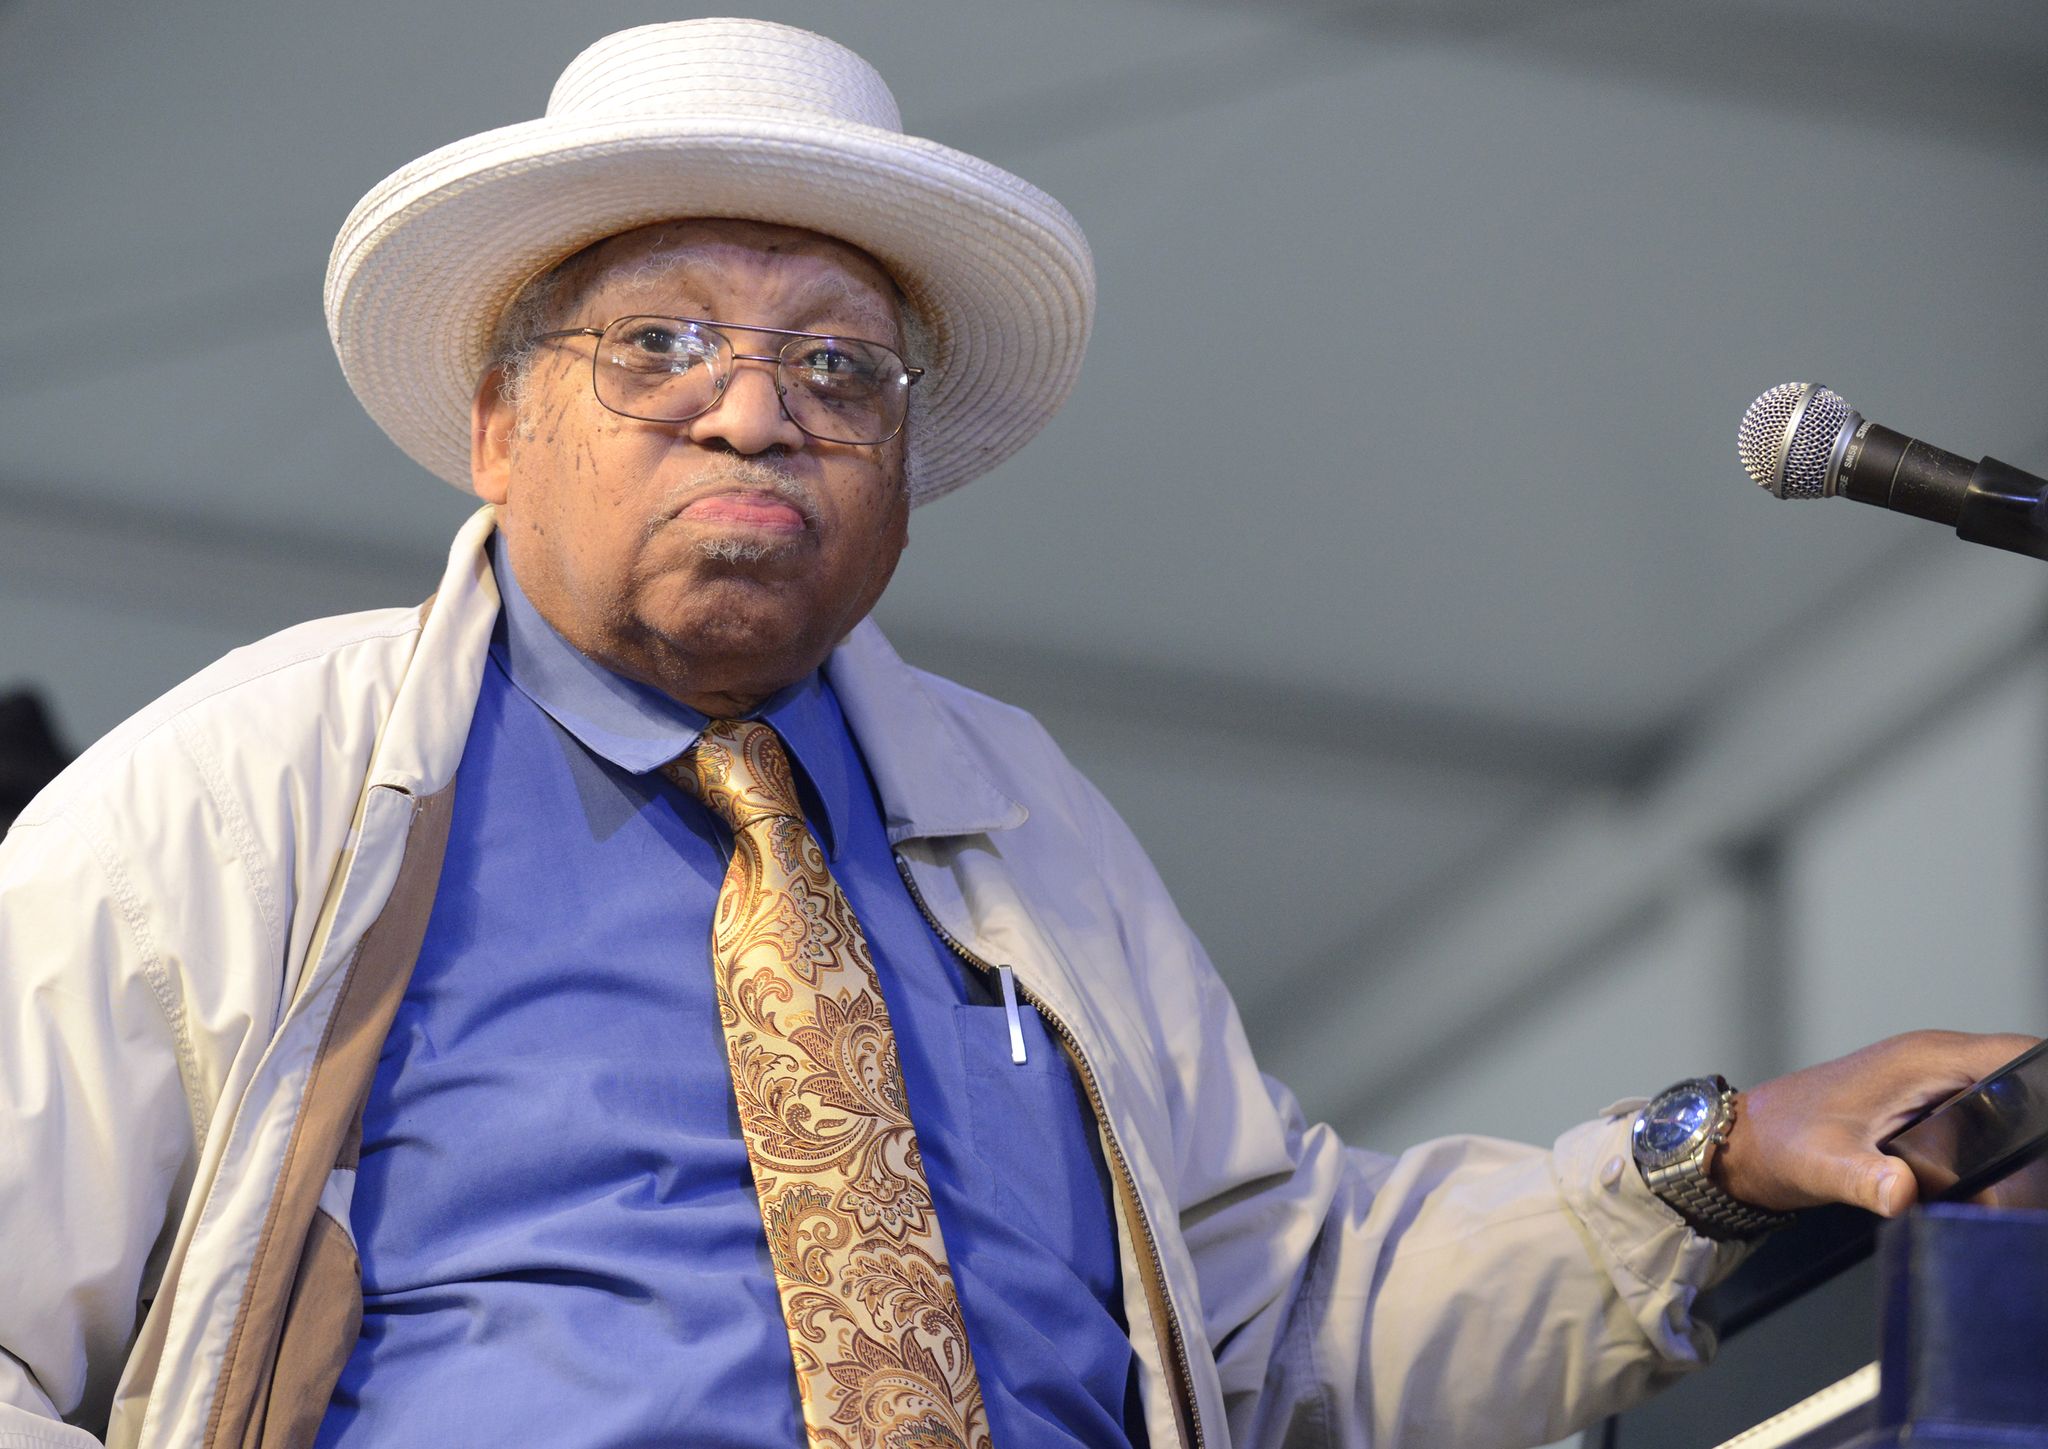 Ellis Marsalis performs as part of the 2013 New Orleans Jazz & Heritage Festival at Fair Grounds Race Course on May 5, 2013 | Photo: Getty Images